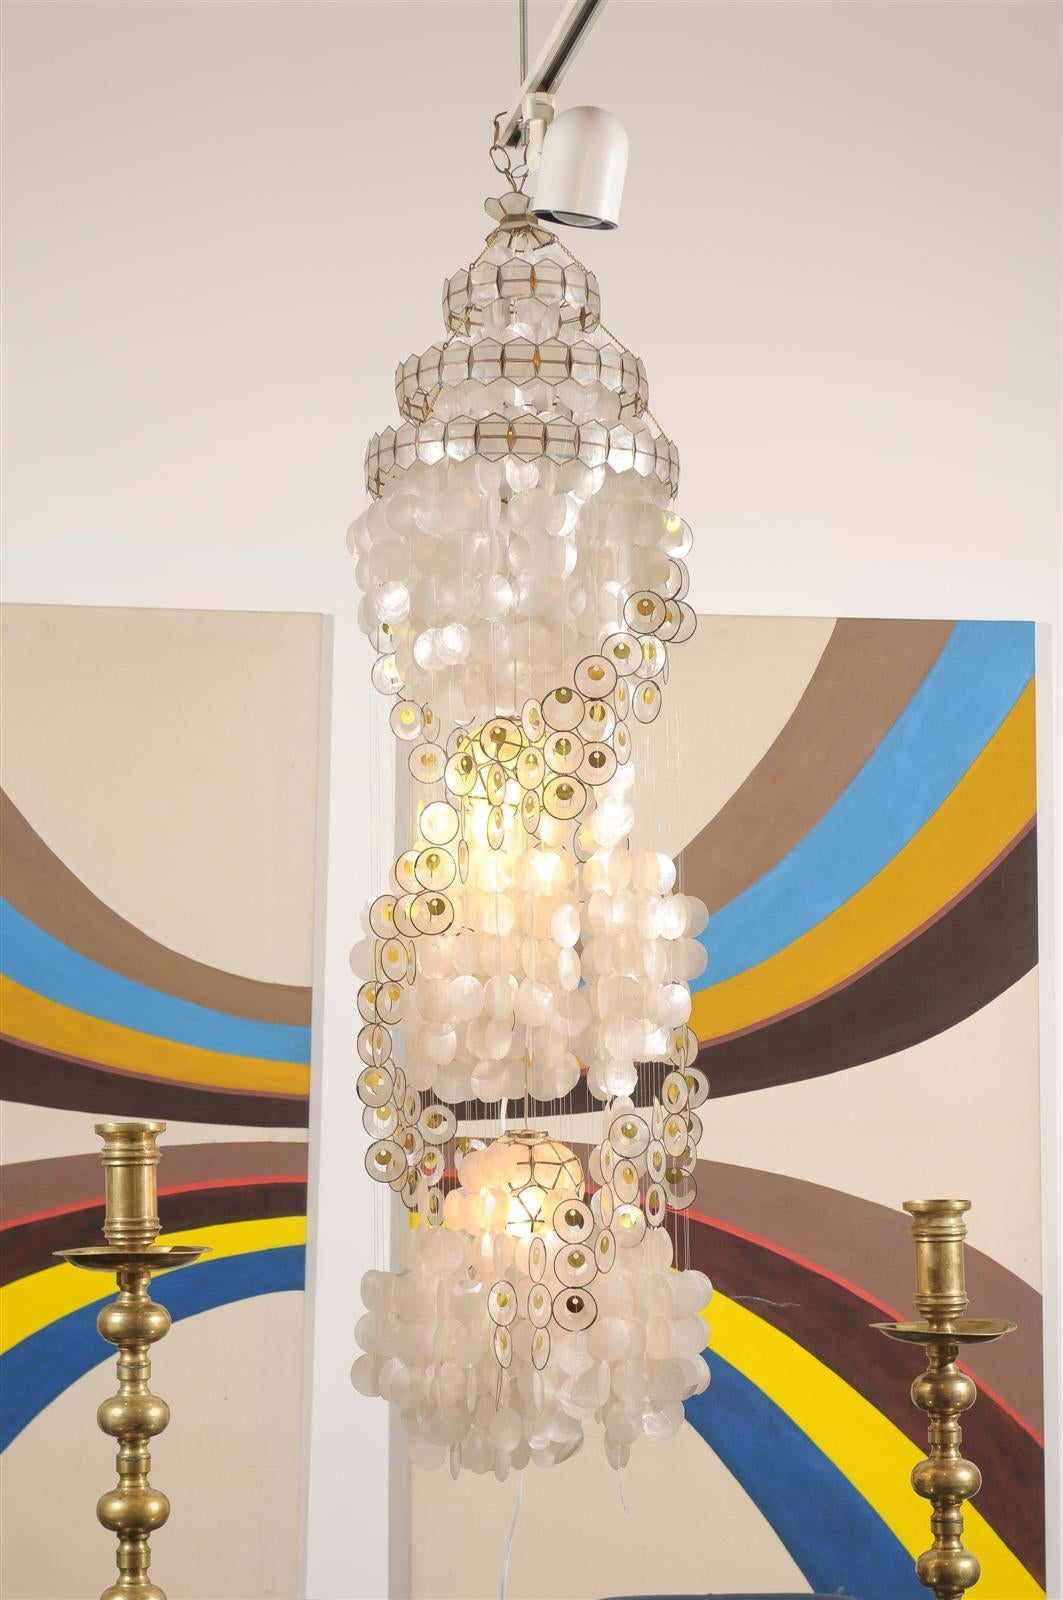 Tall vintage capiz shell chandelier of white with gold accents and having two interior globes holding lights. The light has been rewired.